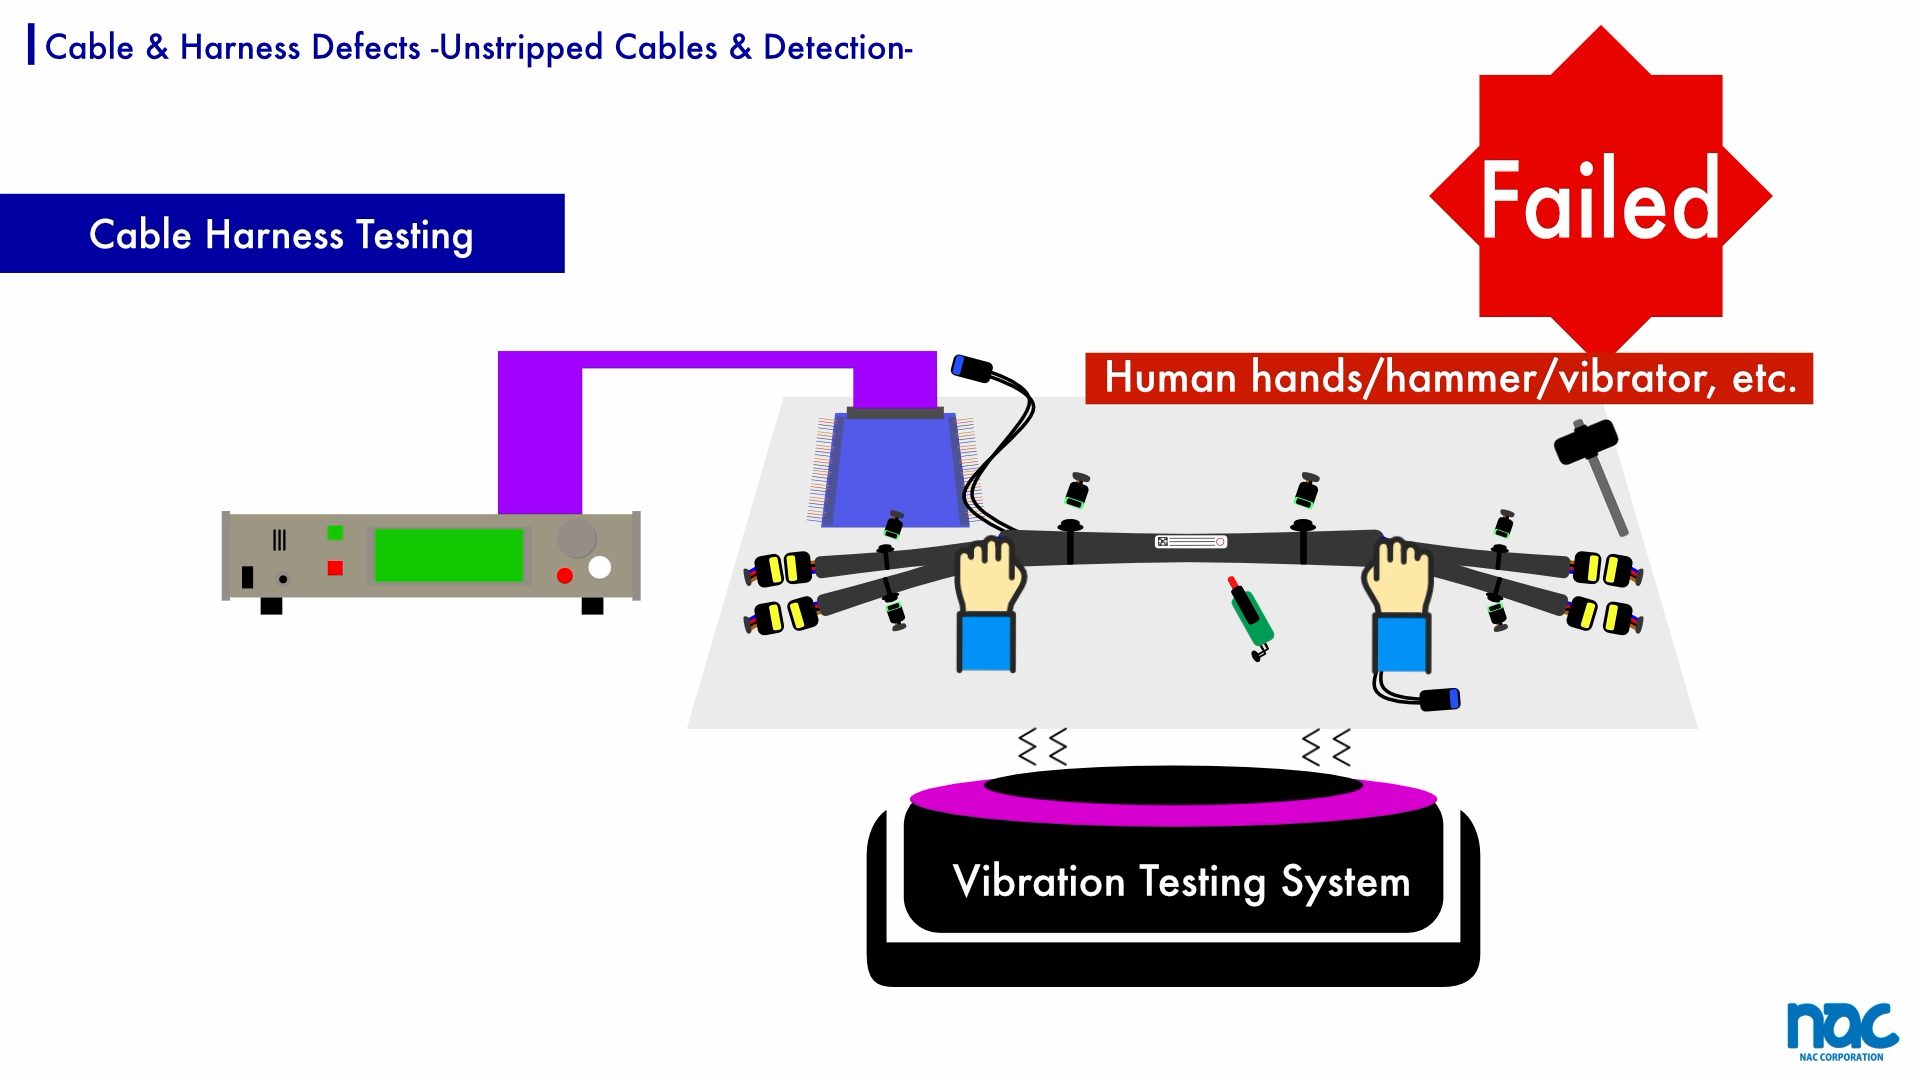 When testing momentary disconnection, apply vibration or shock by hand, hammer, vibrator.